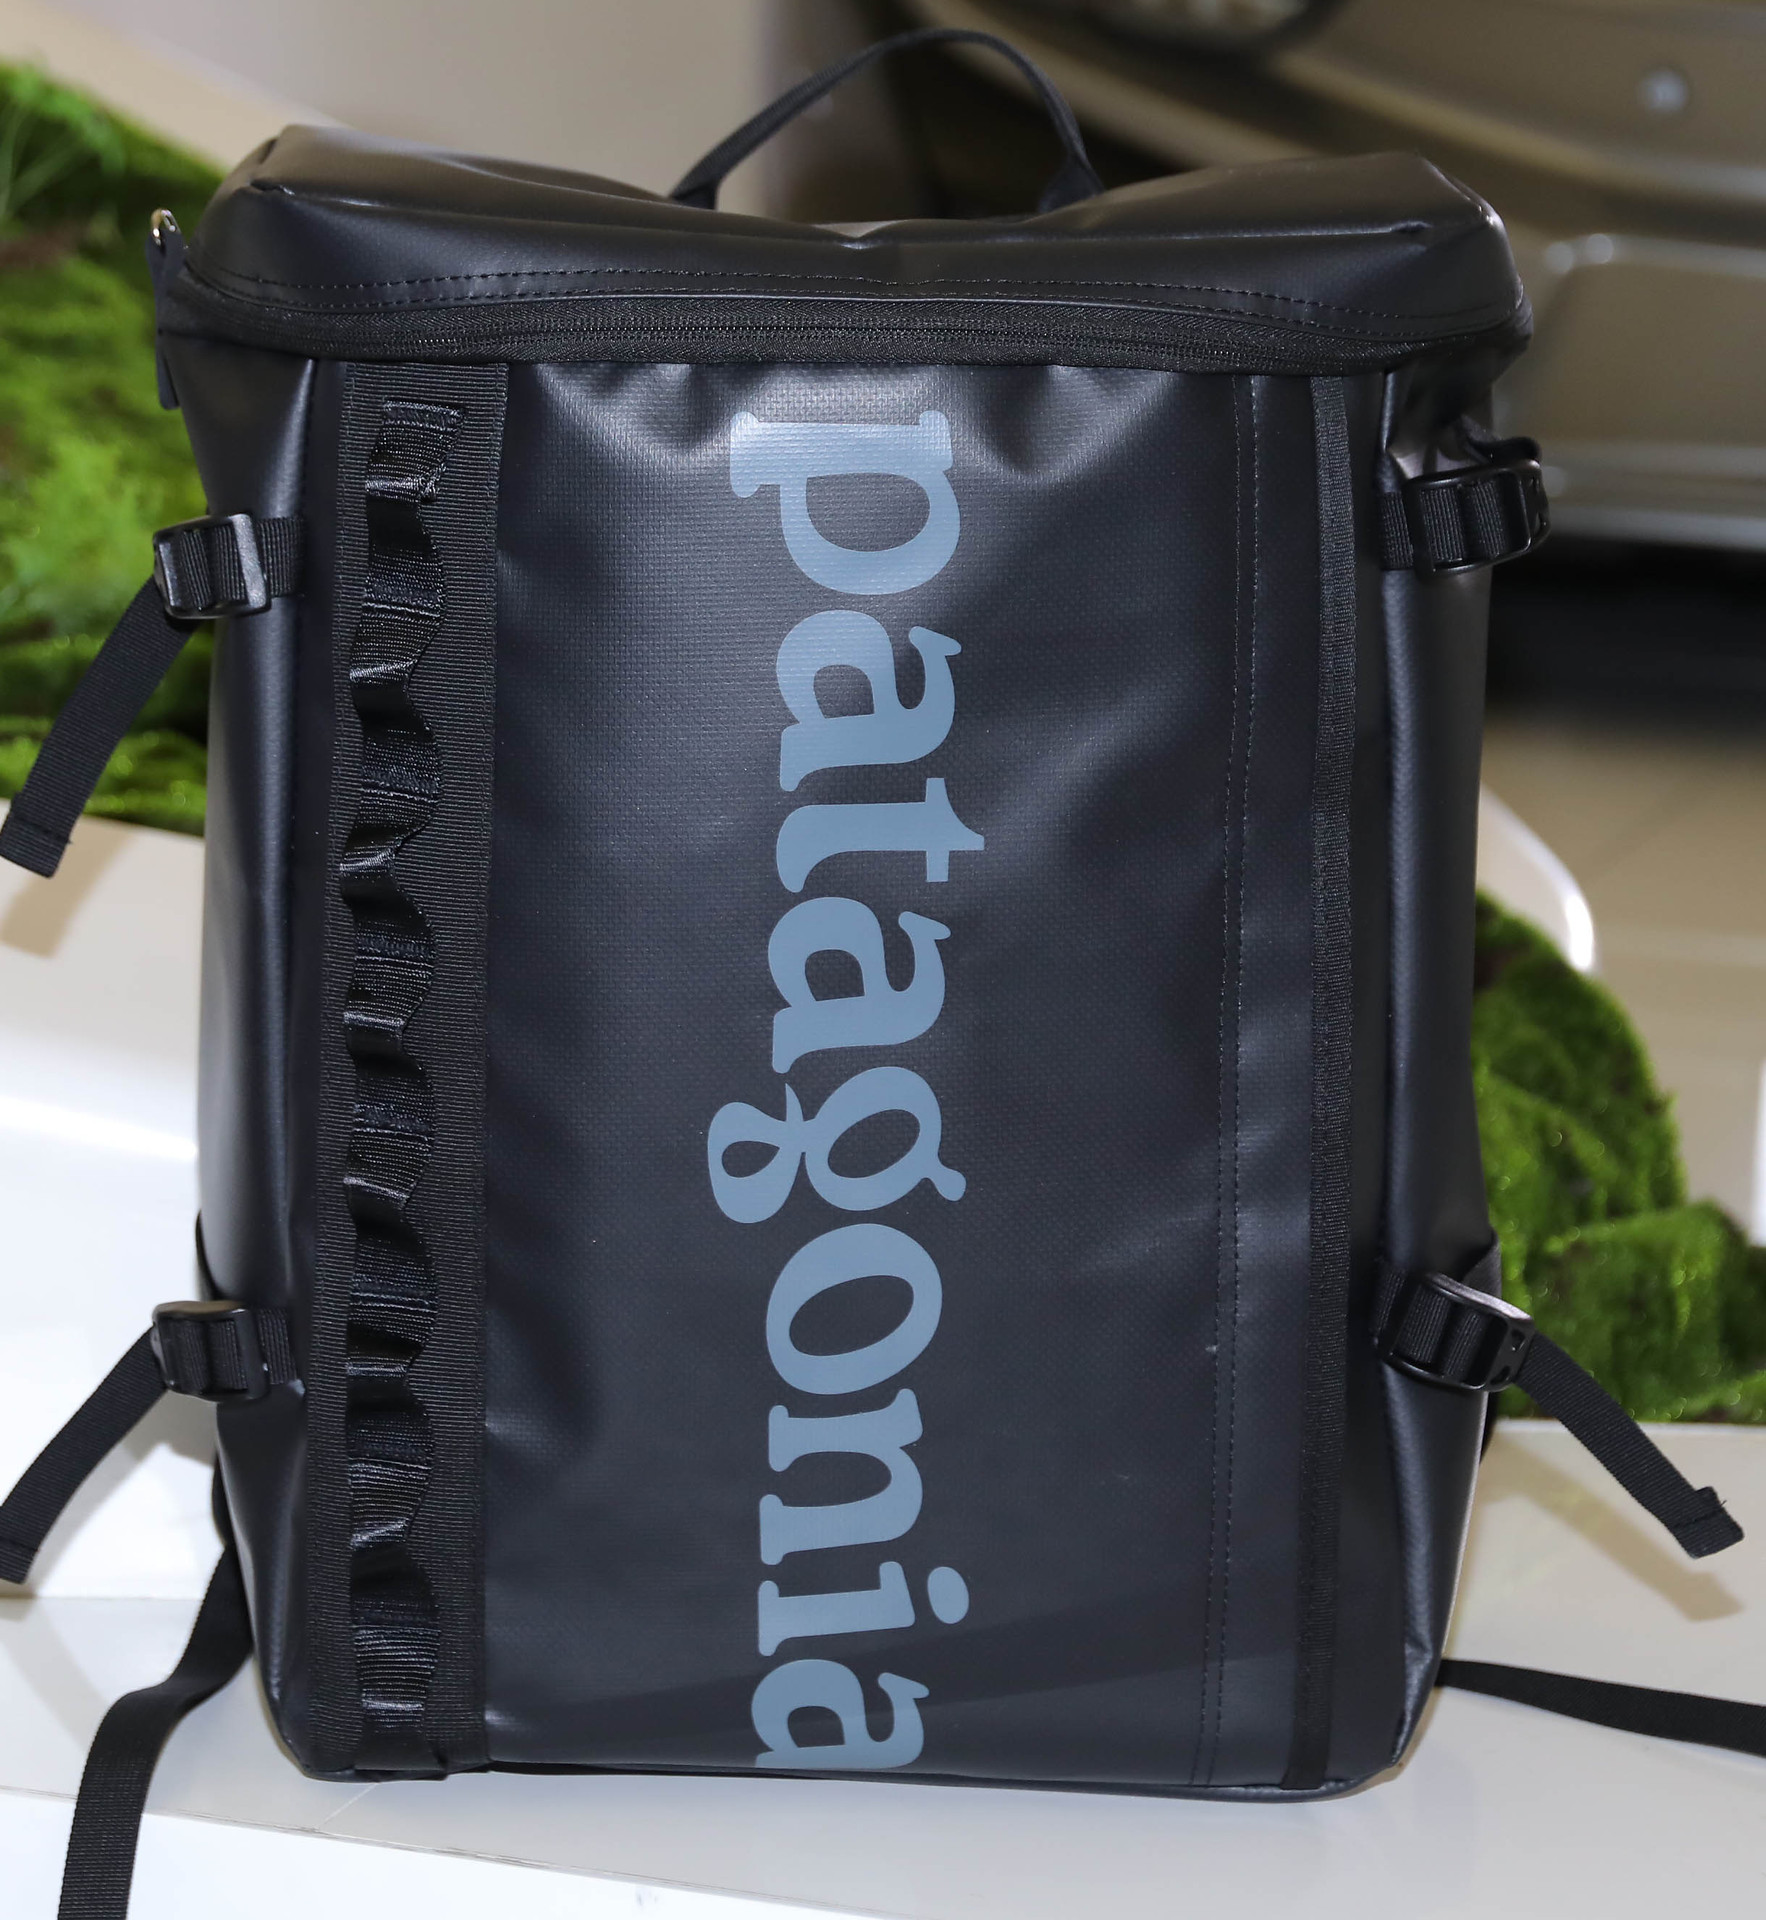 

Pata-gonia bag fashion outdoors fashion high quality designer brand Backpack casual bag school student bag backpack, Connect us if need tee